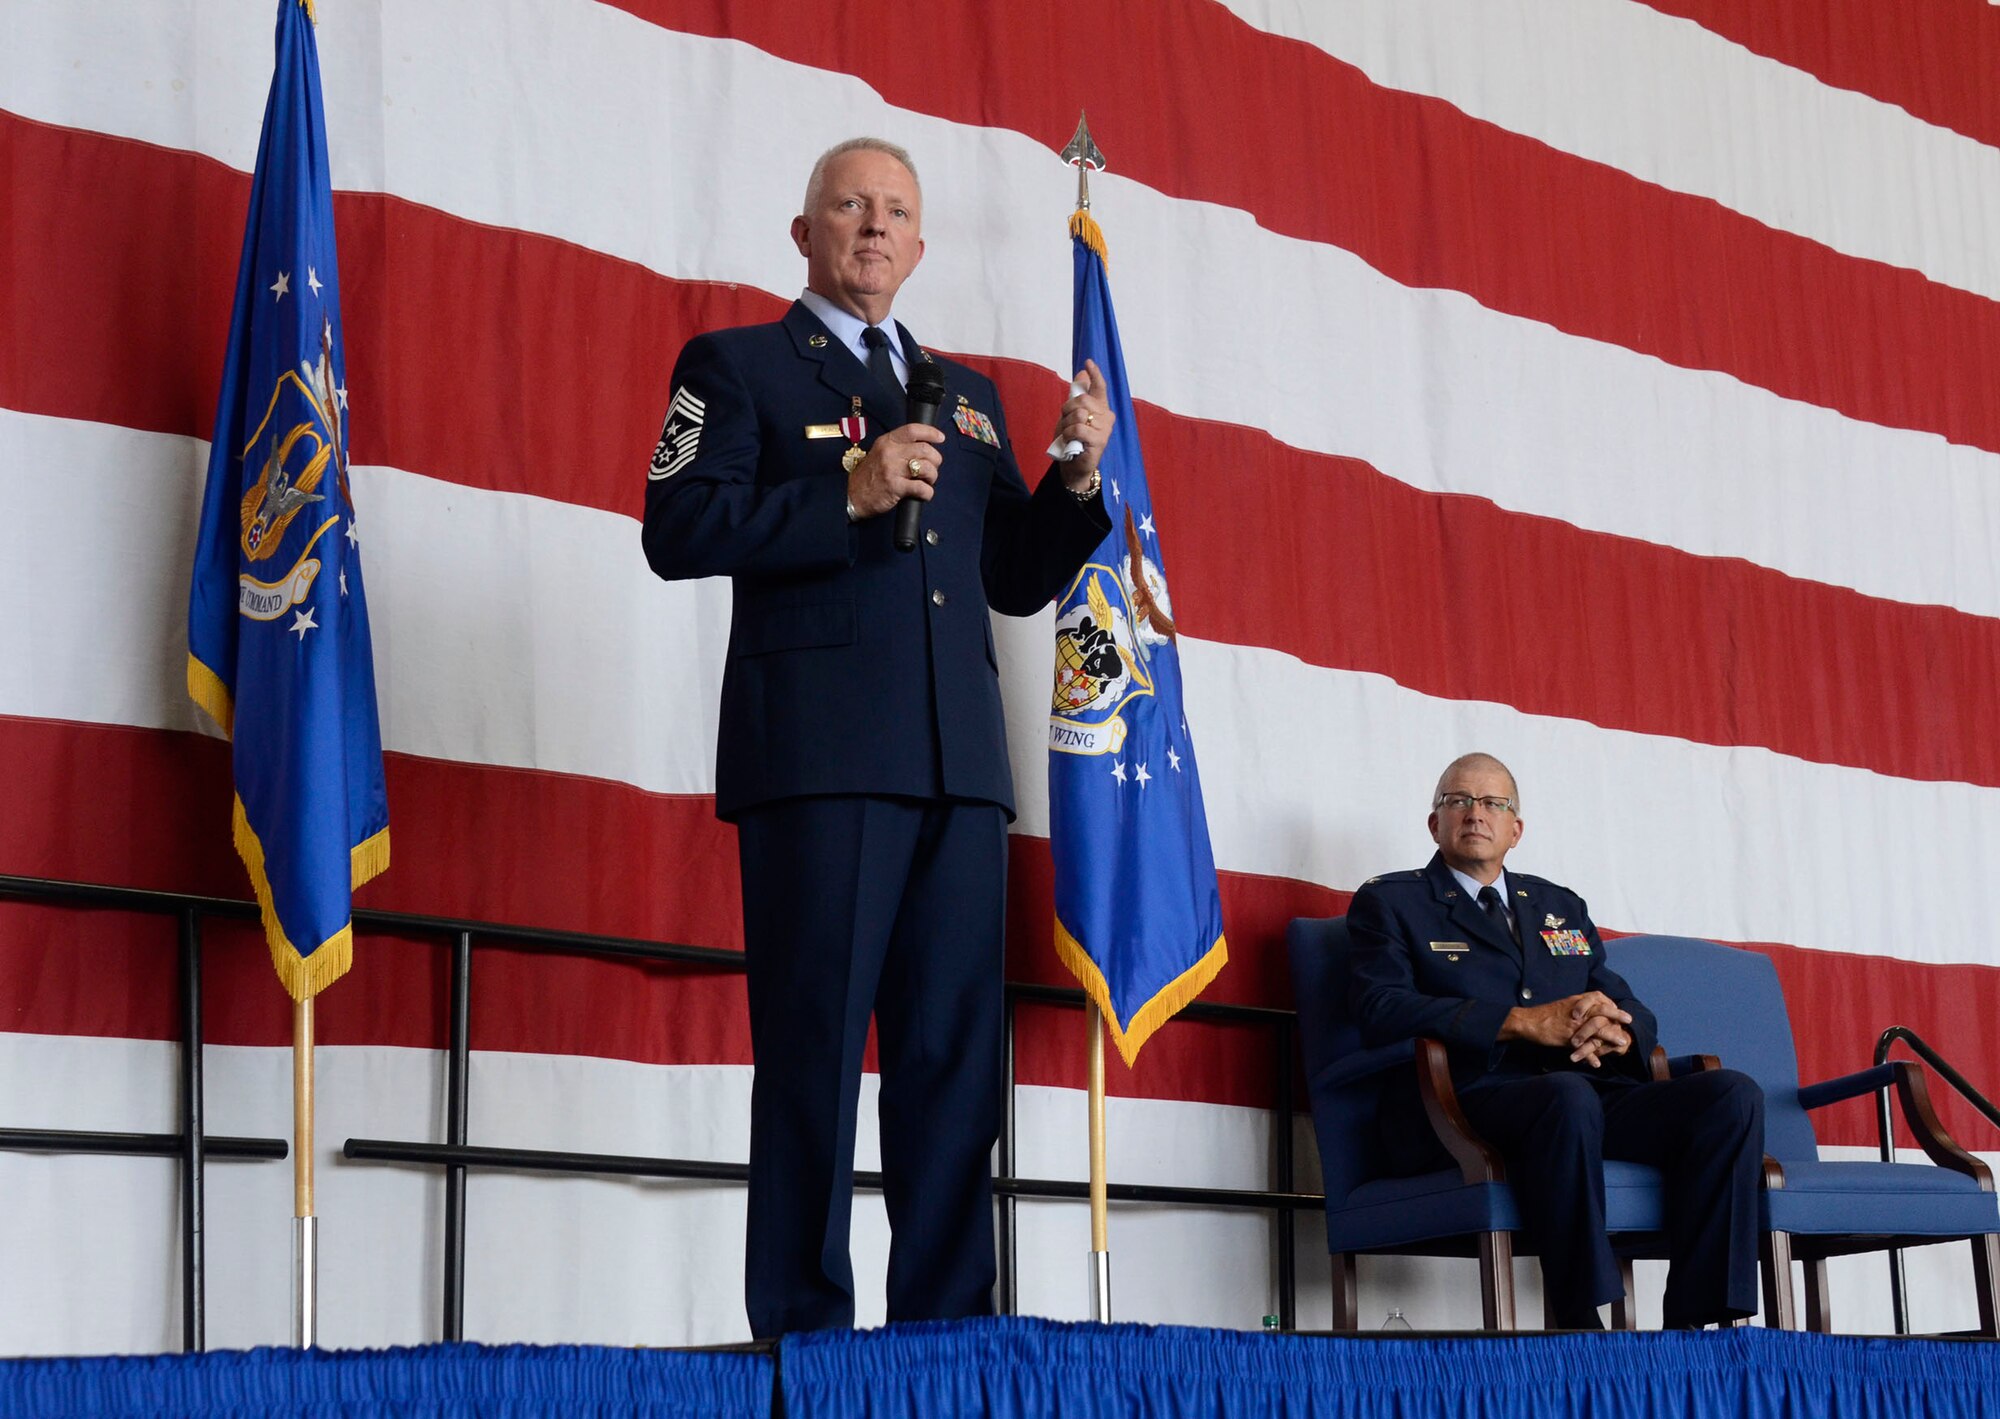 Chief Master Sgt. Wendell L. Peacock, 94th Airlift Wing command chief is honored by over 600 people for 33 years of military service during a retirement ceremony at Dobbins Air Reserve Base, Aug. 2, 2014. Col. (Ret) Timothy Tarchick looks on. “We’re here to celebrate a brave and honorable man’s career,” said Tarchick, who presided over the ceremony. “In February 2011, I hired a fantastic leader to maintain the readiness of our enlisted force - a man of character, integrity, and trustworthiness.” (U.S. Air Force photo/Don Peek)